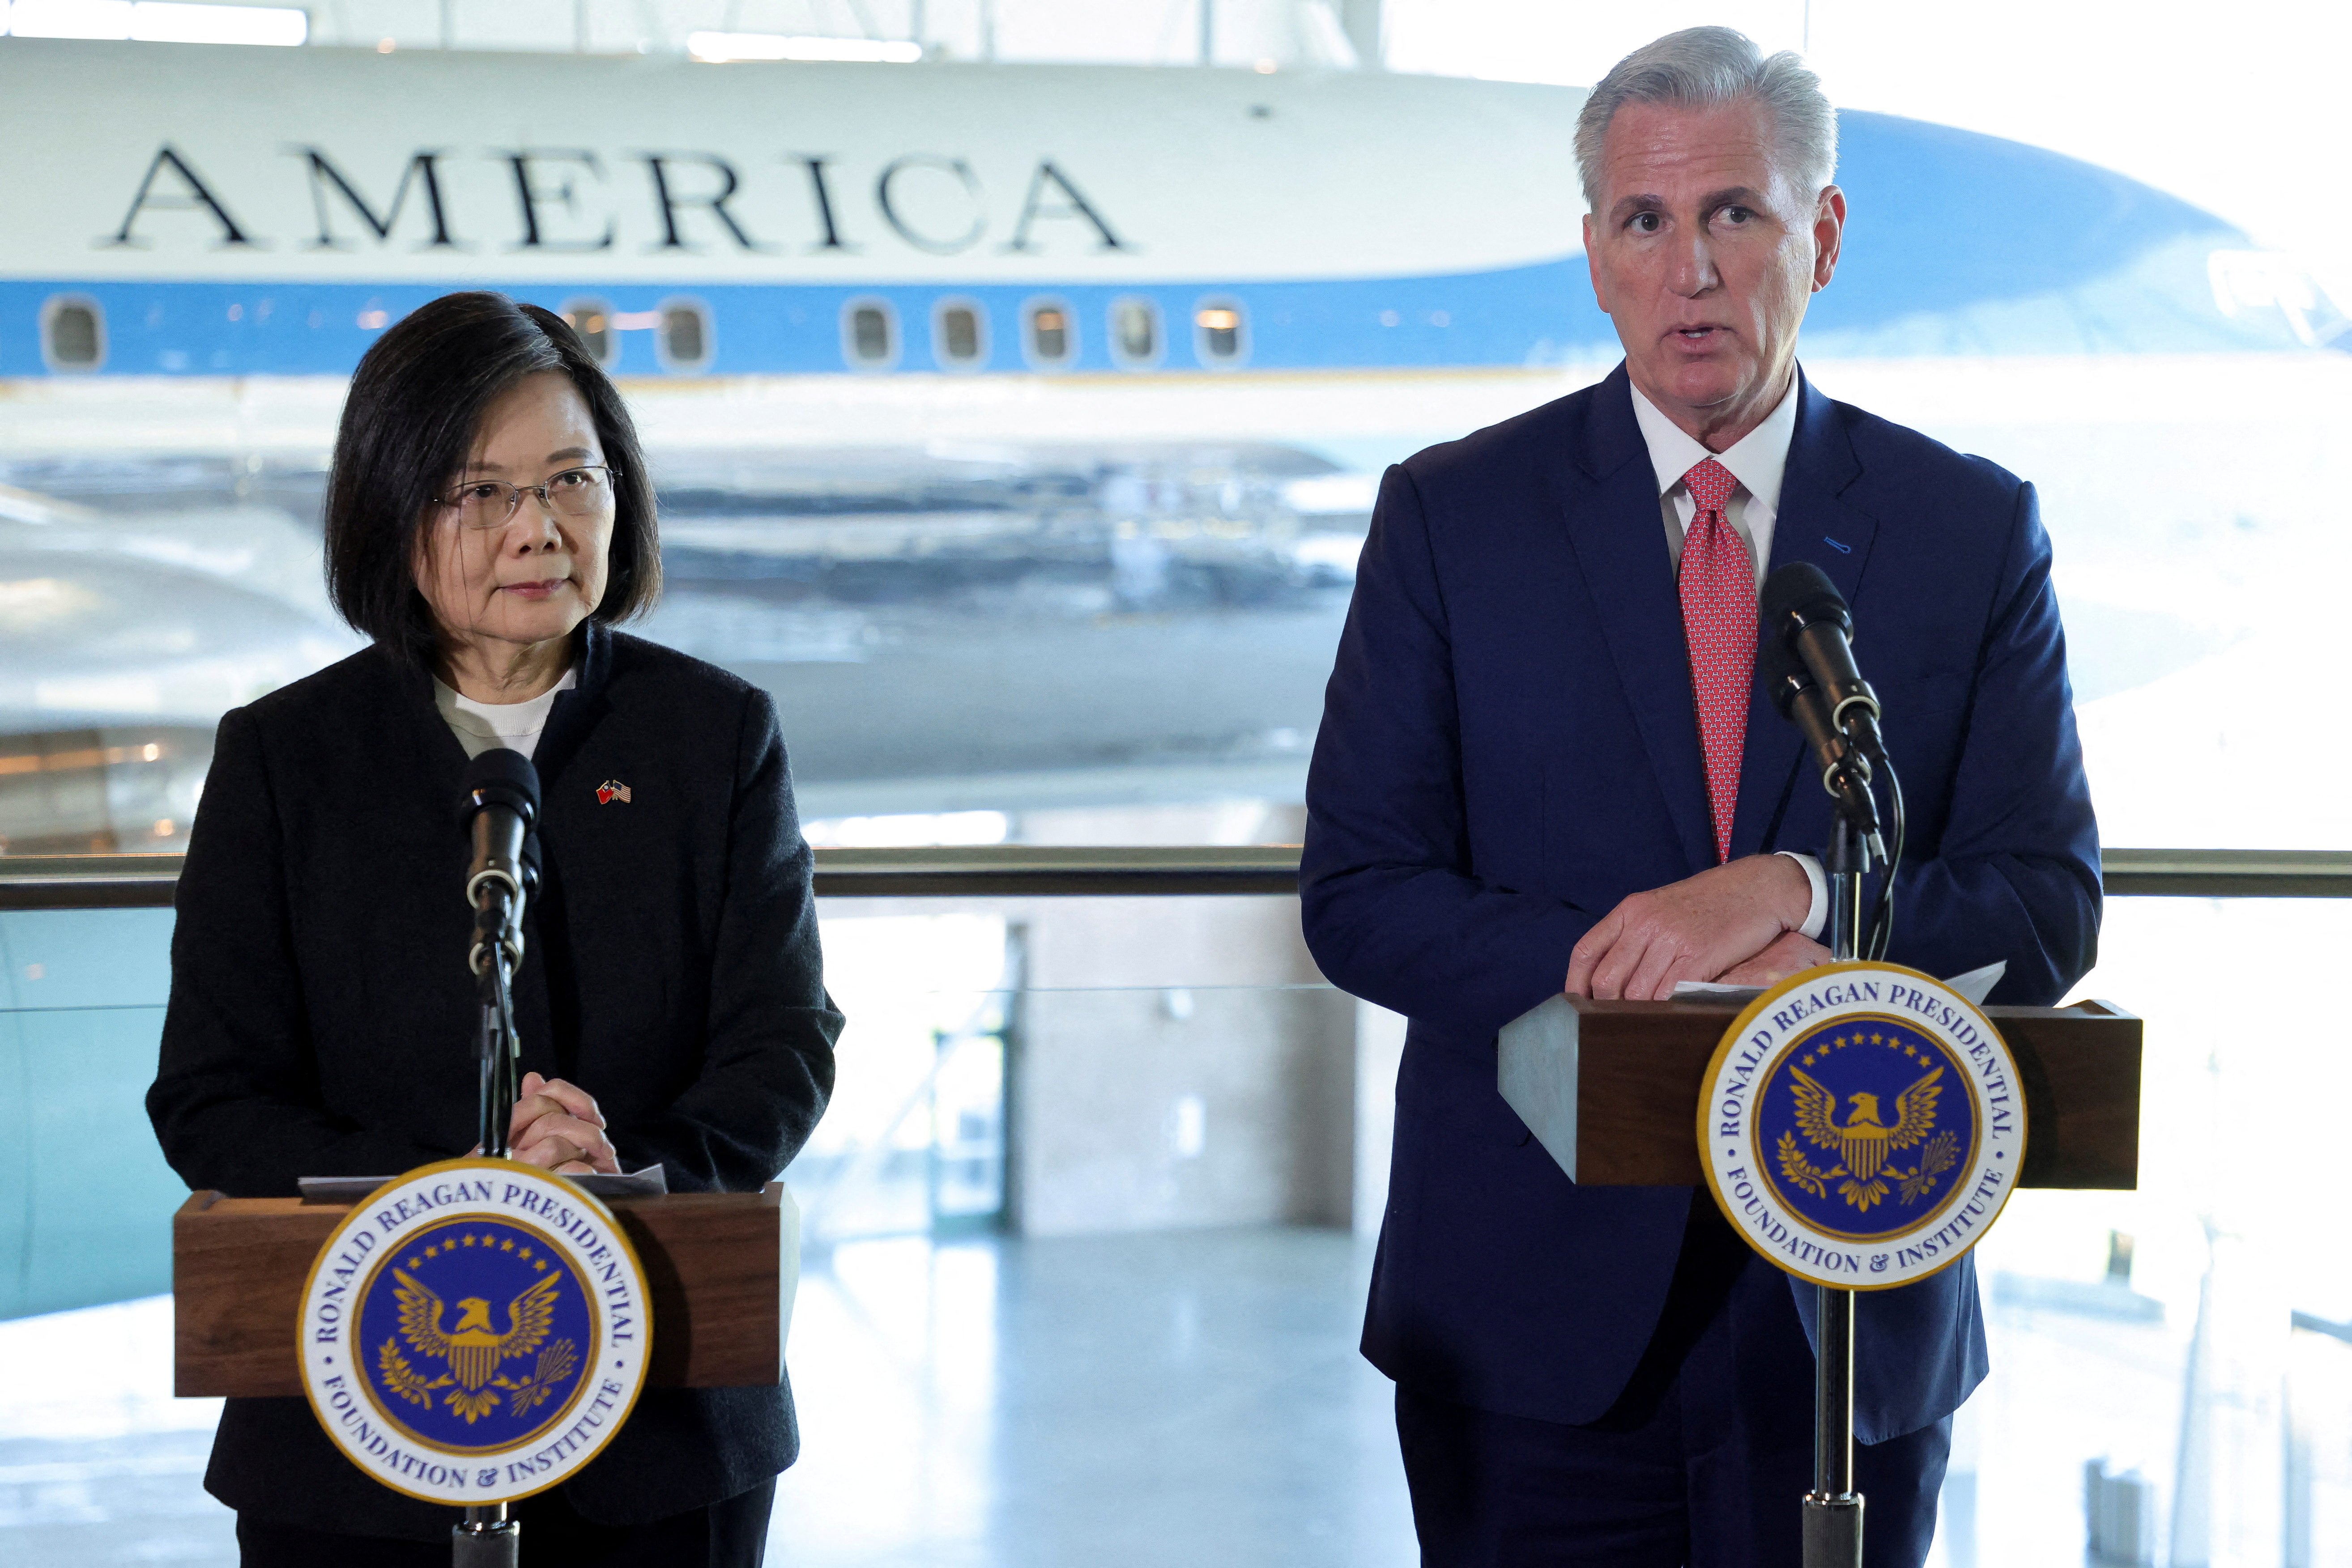 Taiwan's President Tsai Ing-wen meets the U.S. Speaker of the House Kevin McCarthy, in Simi Valley, California